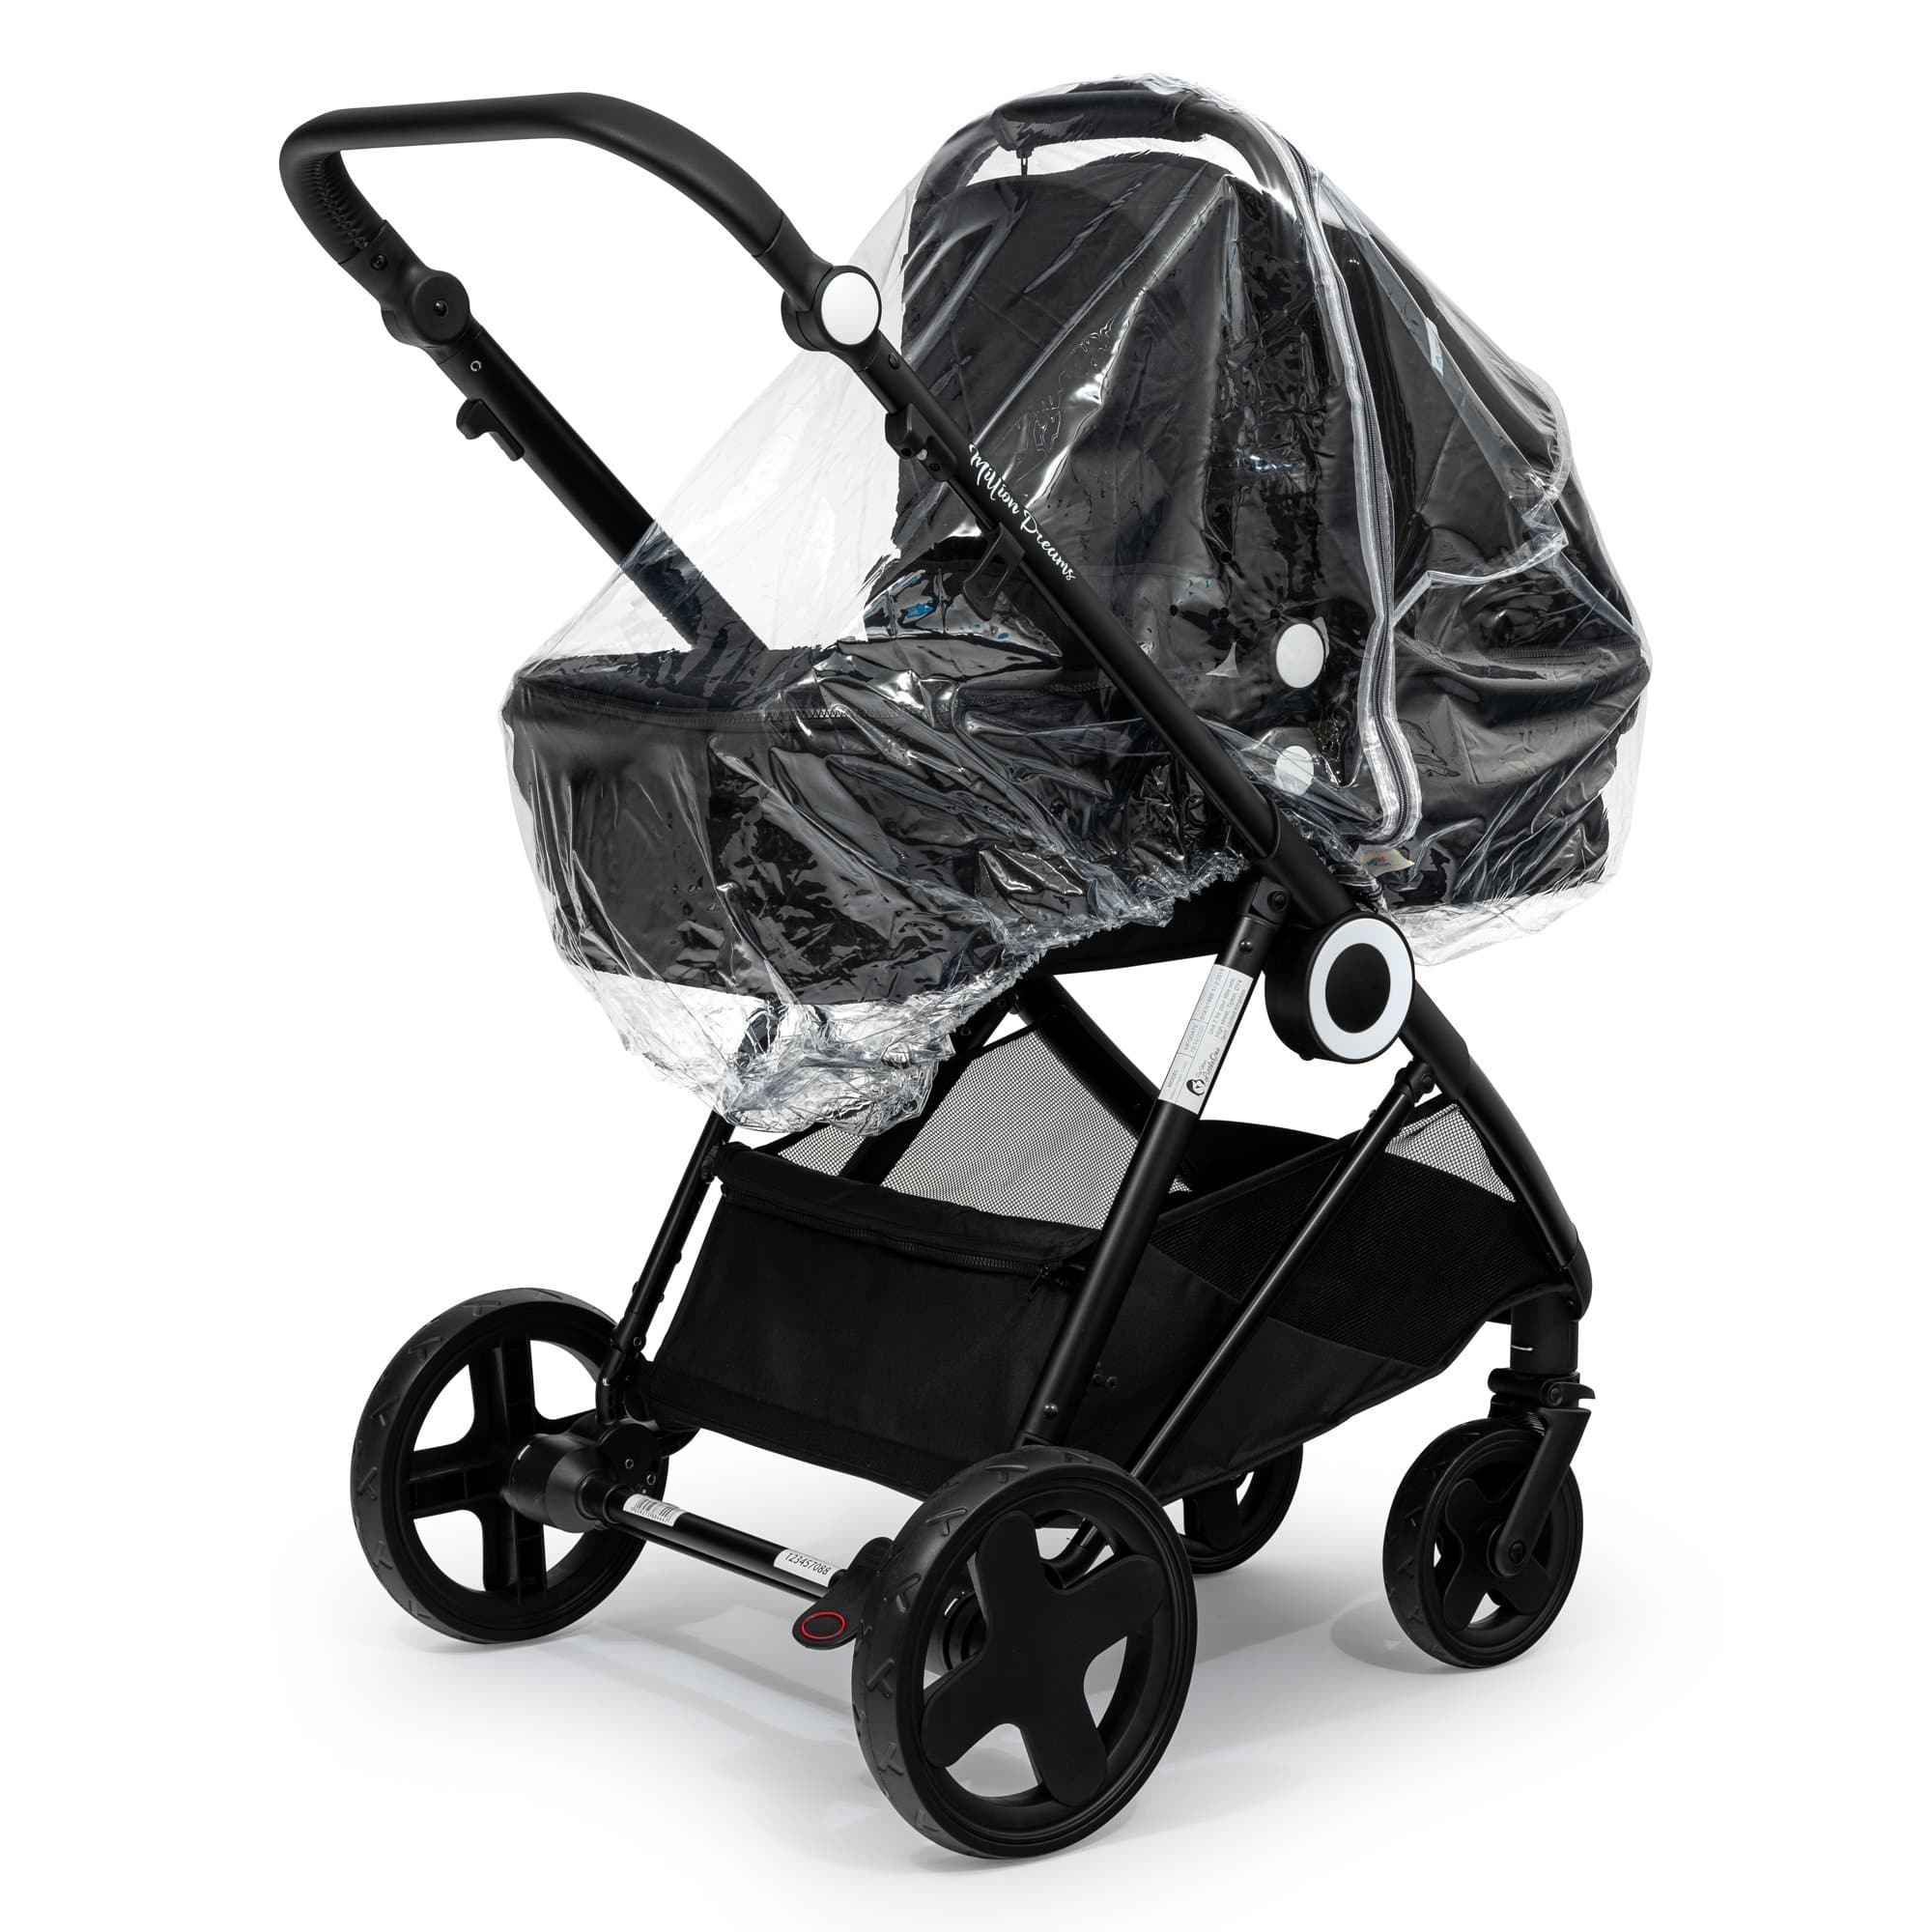 2 in 1 Rain Cover Compatible with Combi - Fits All Models - For Your Little One